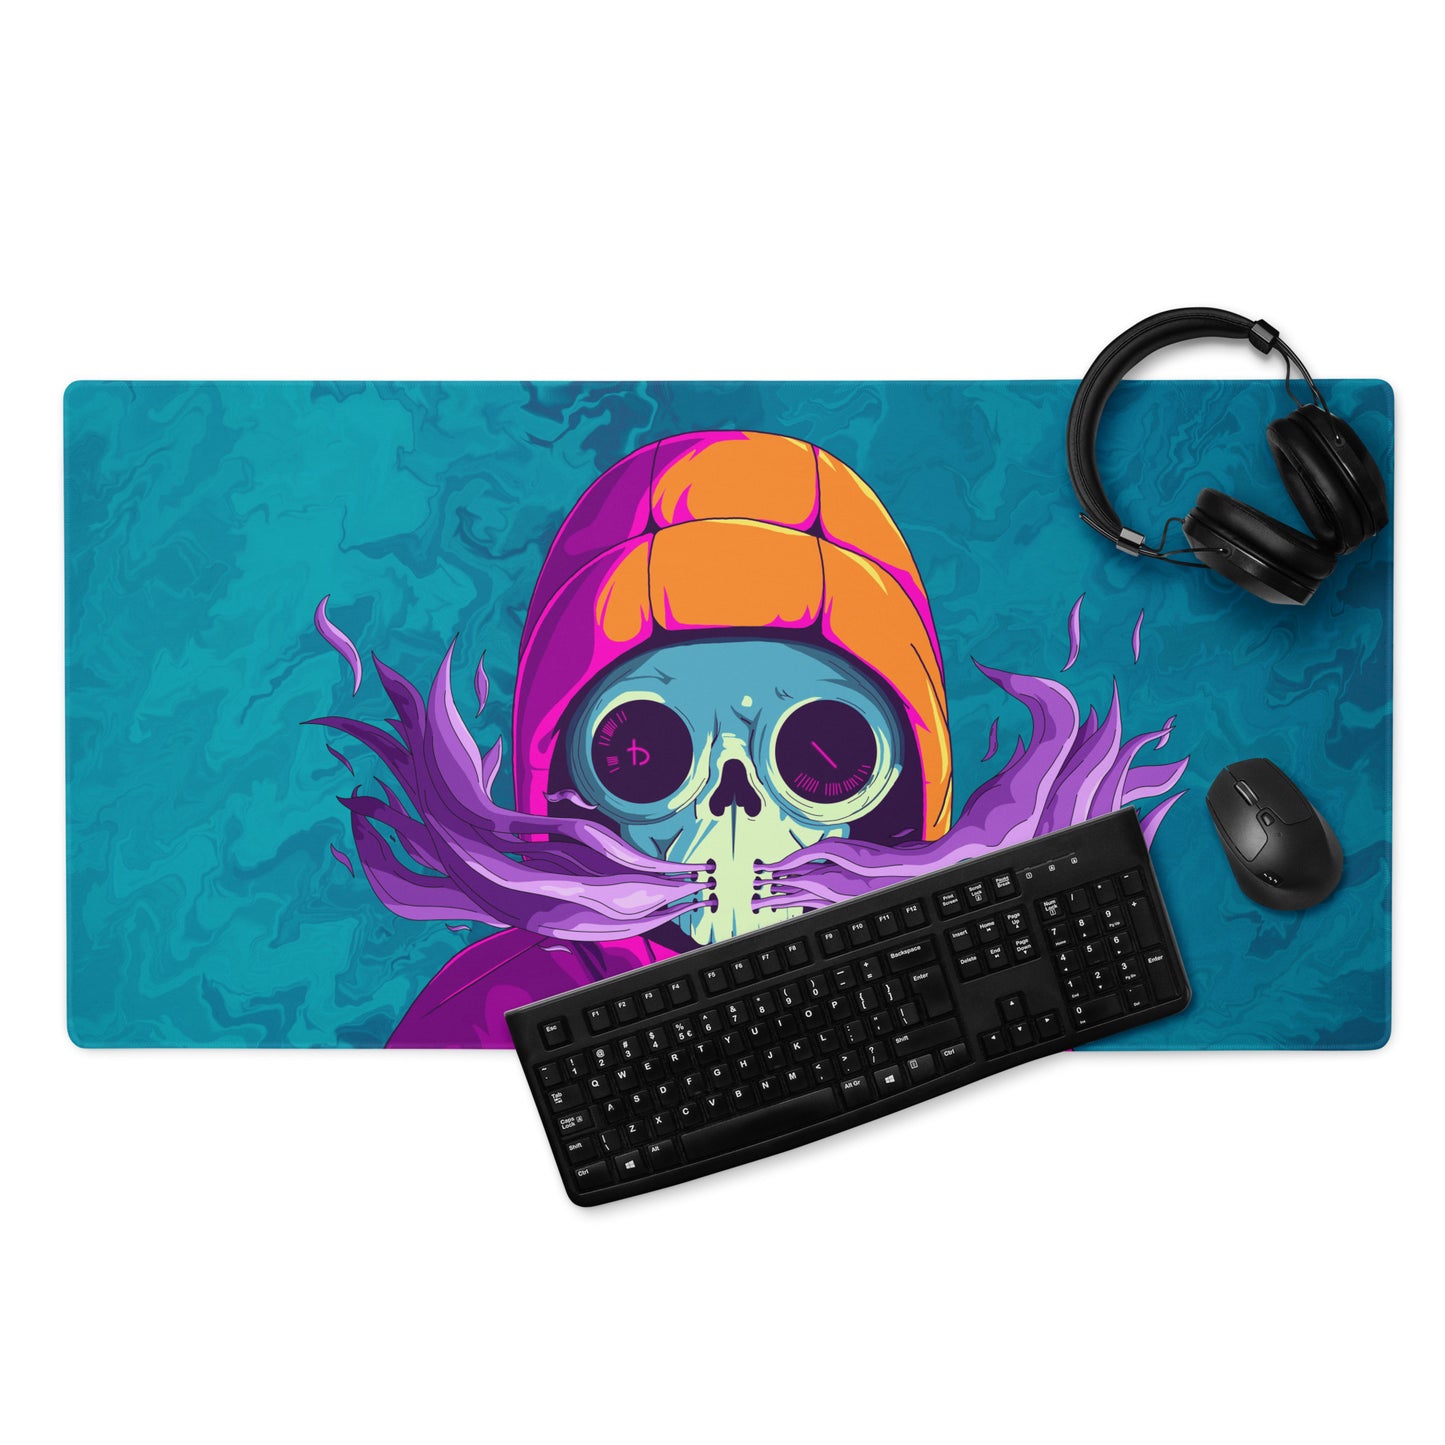 A 36" x 18" desk pad with a man wearing a skull gas mask breathing smoke out from it displayed with a keyboard, headphones and a mouse. Blue in color.